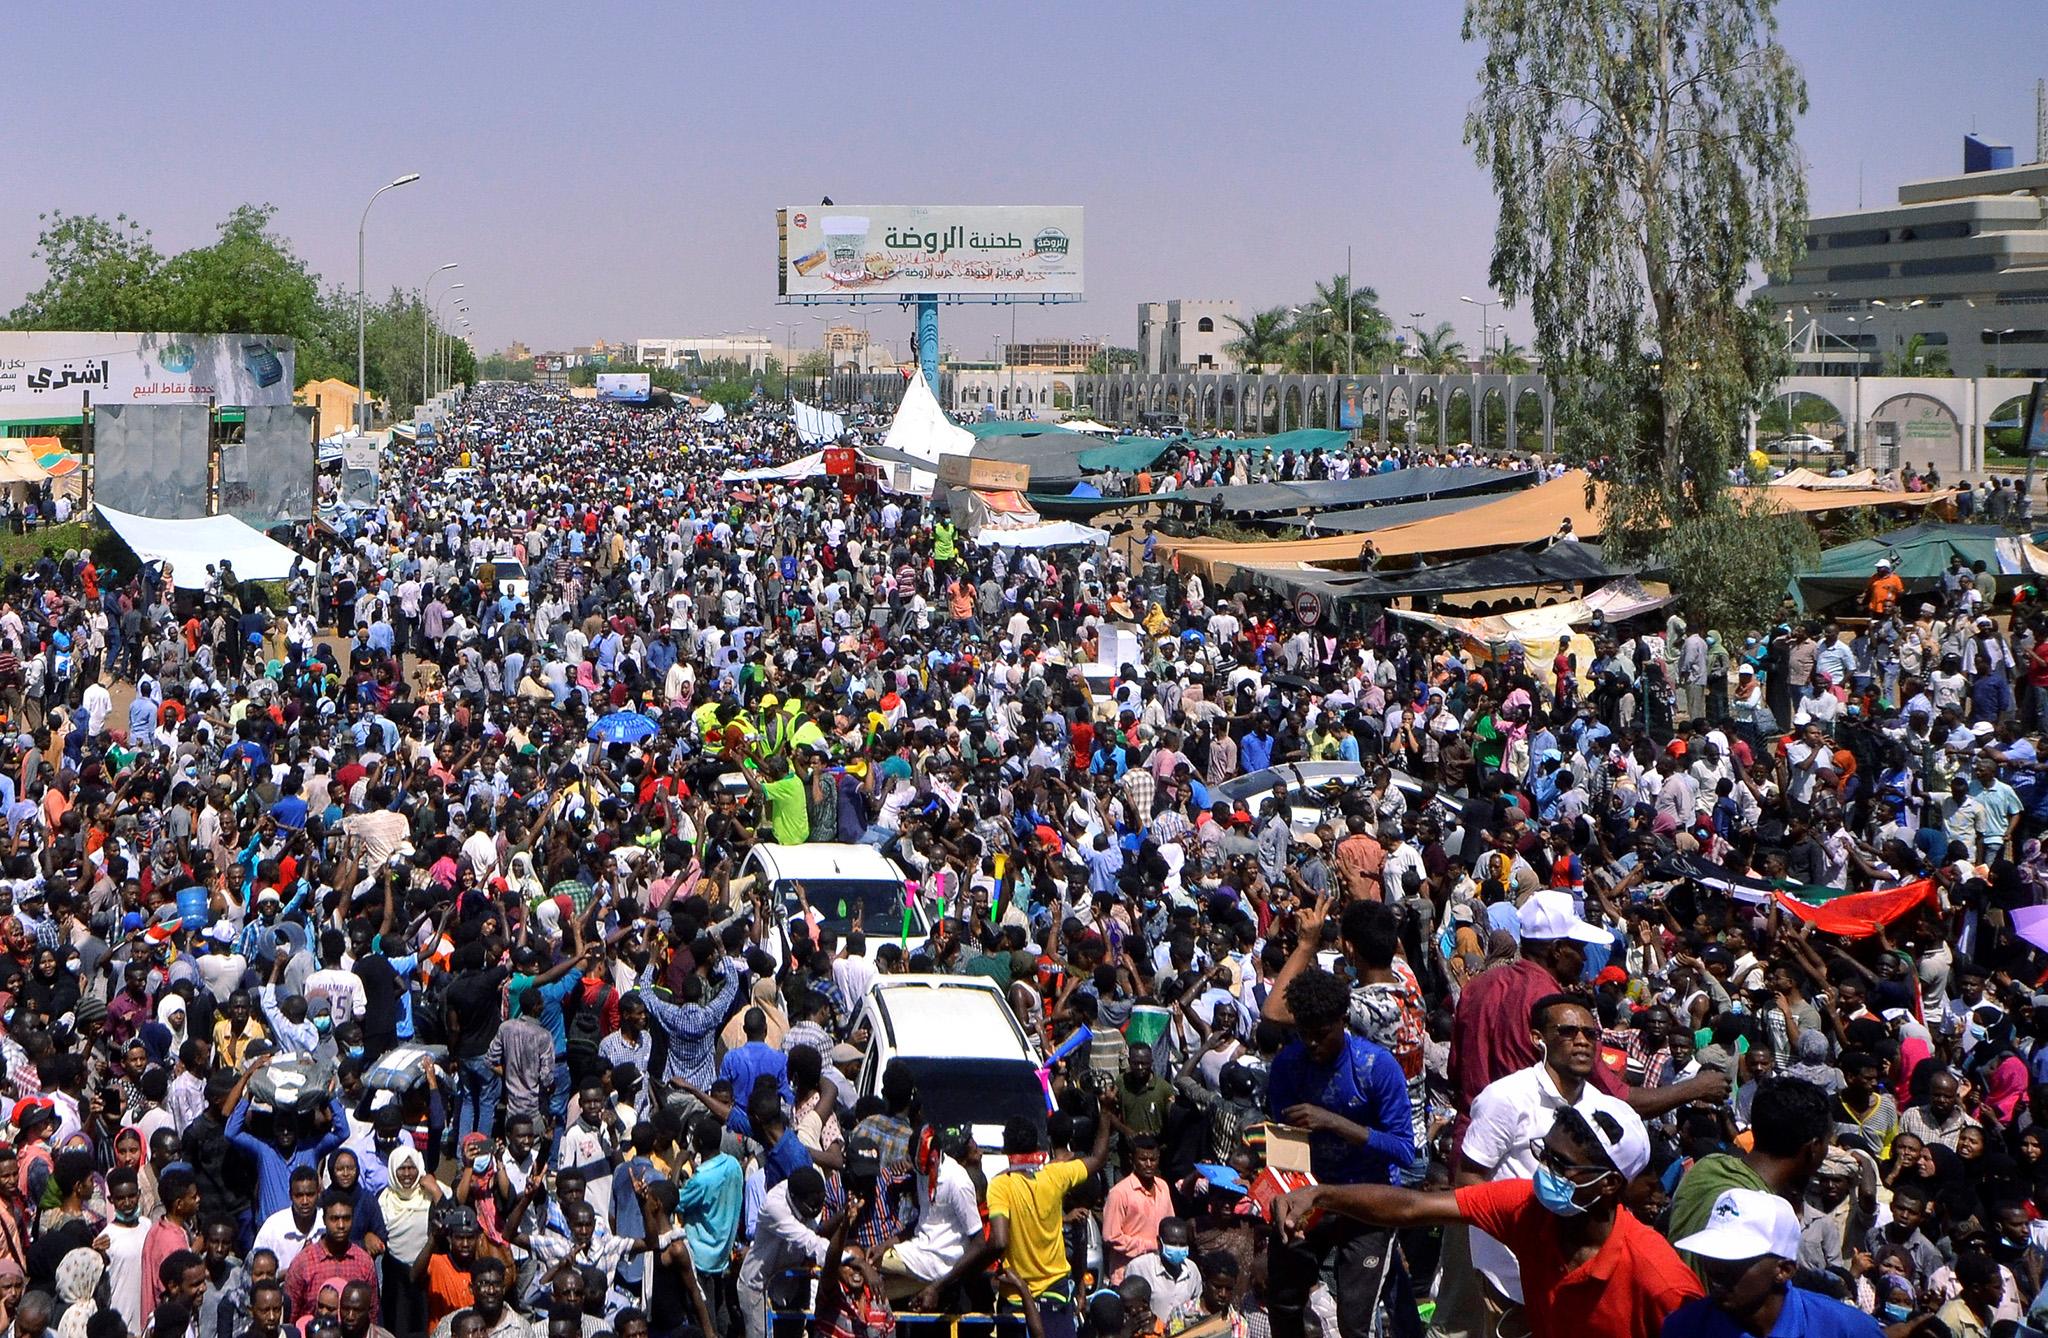 Image result for sudan protests